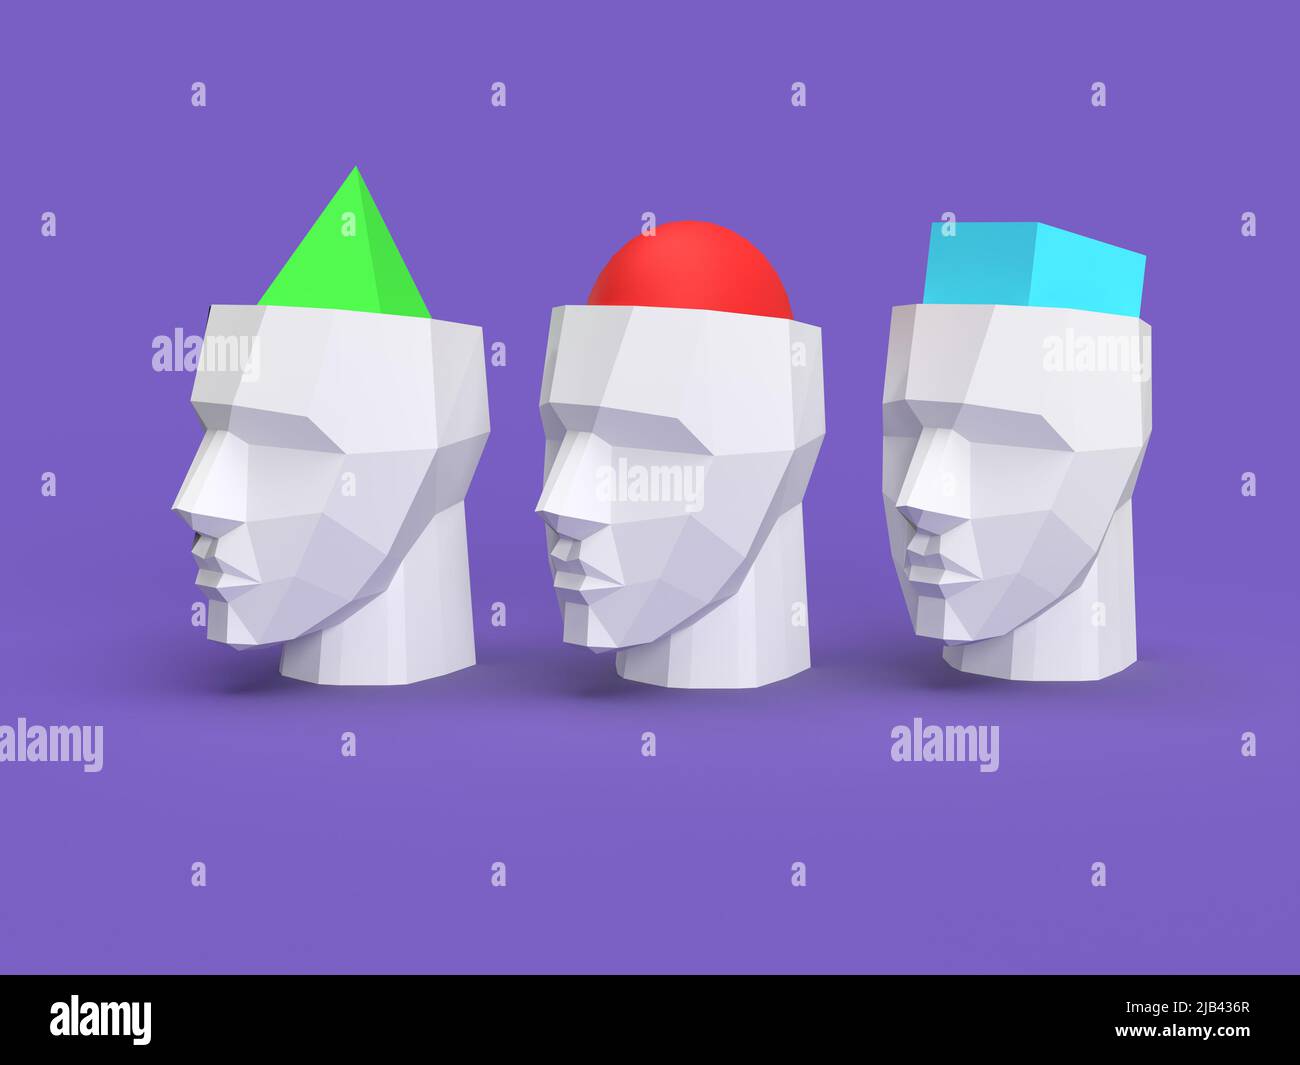 opinion diversity: people having different convictions 3d illustration heads filled with different geometric figures Stock Photo